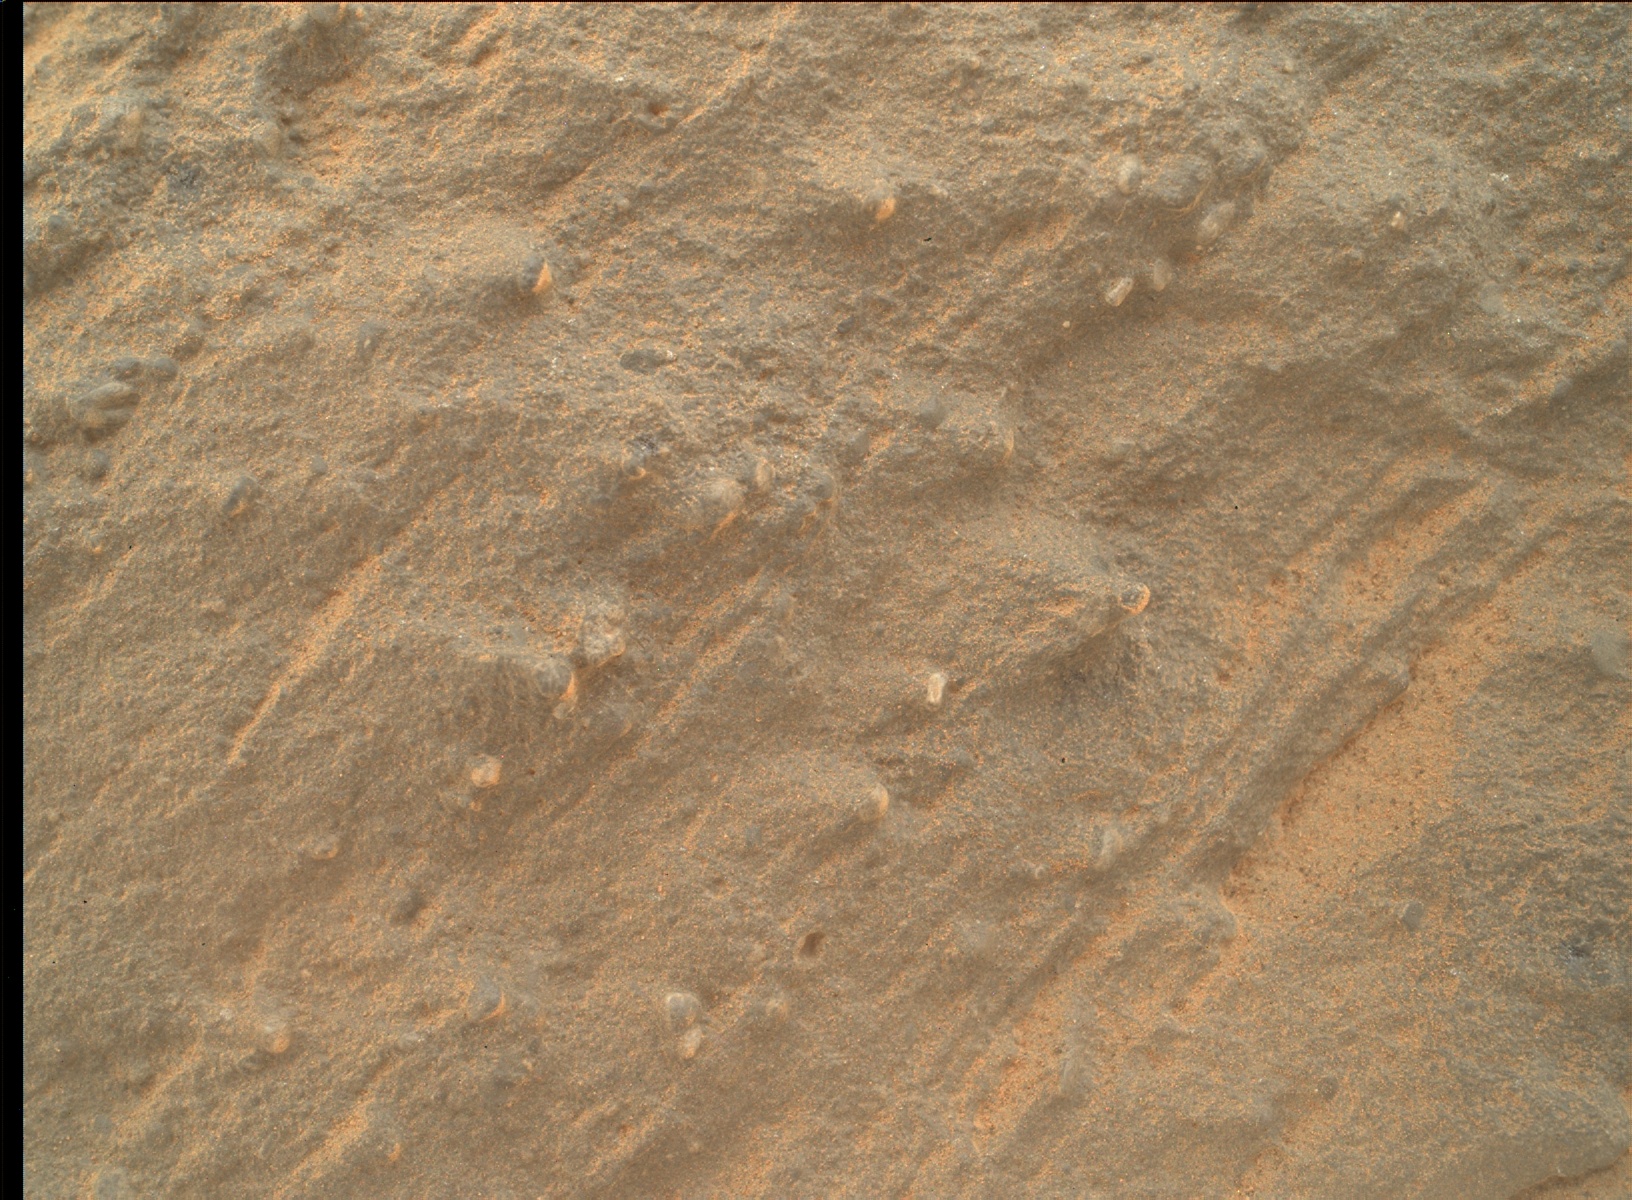 Nasa's Mars rover Curiosity acquired this image using its Mars Hand Lens Imager (MAHLI) on Sol 583